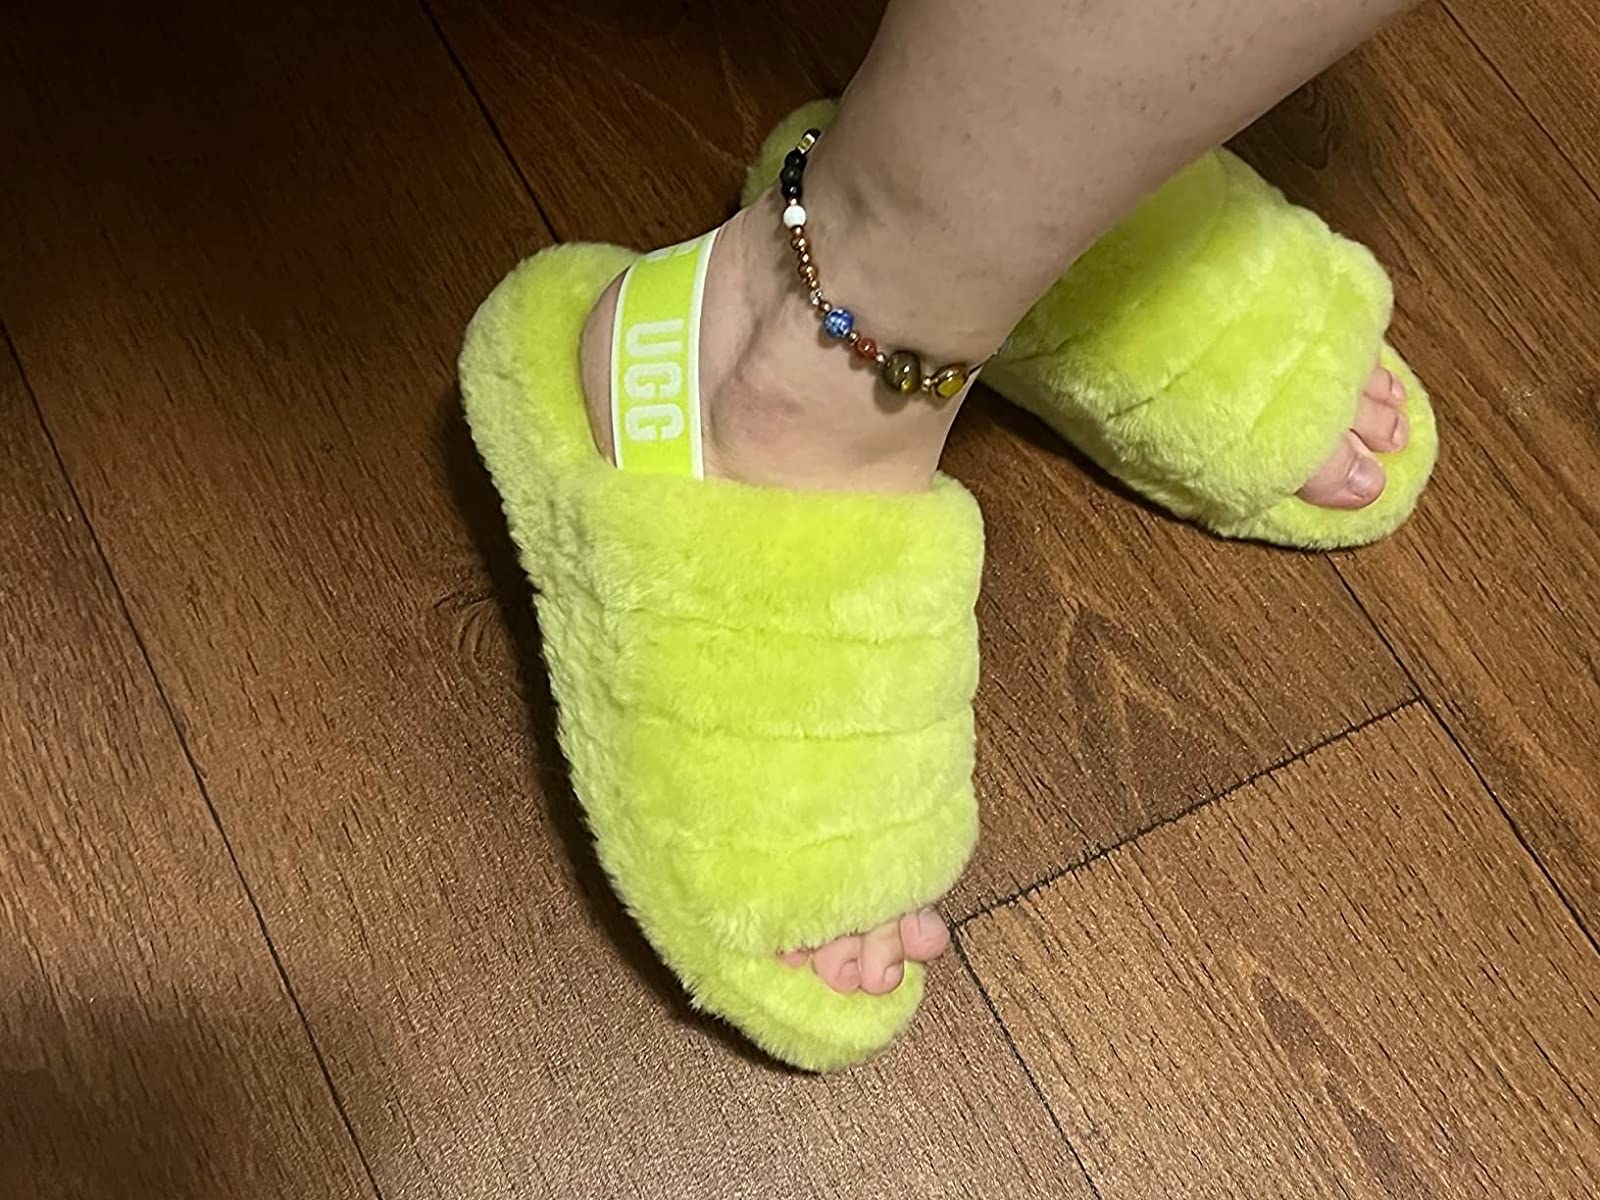 Reviewer in the lime green slippers